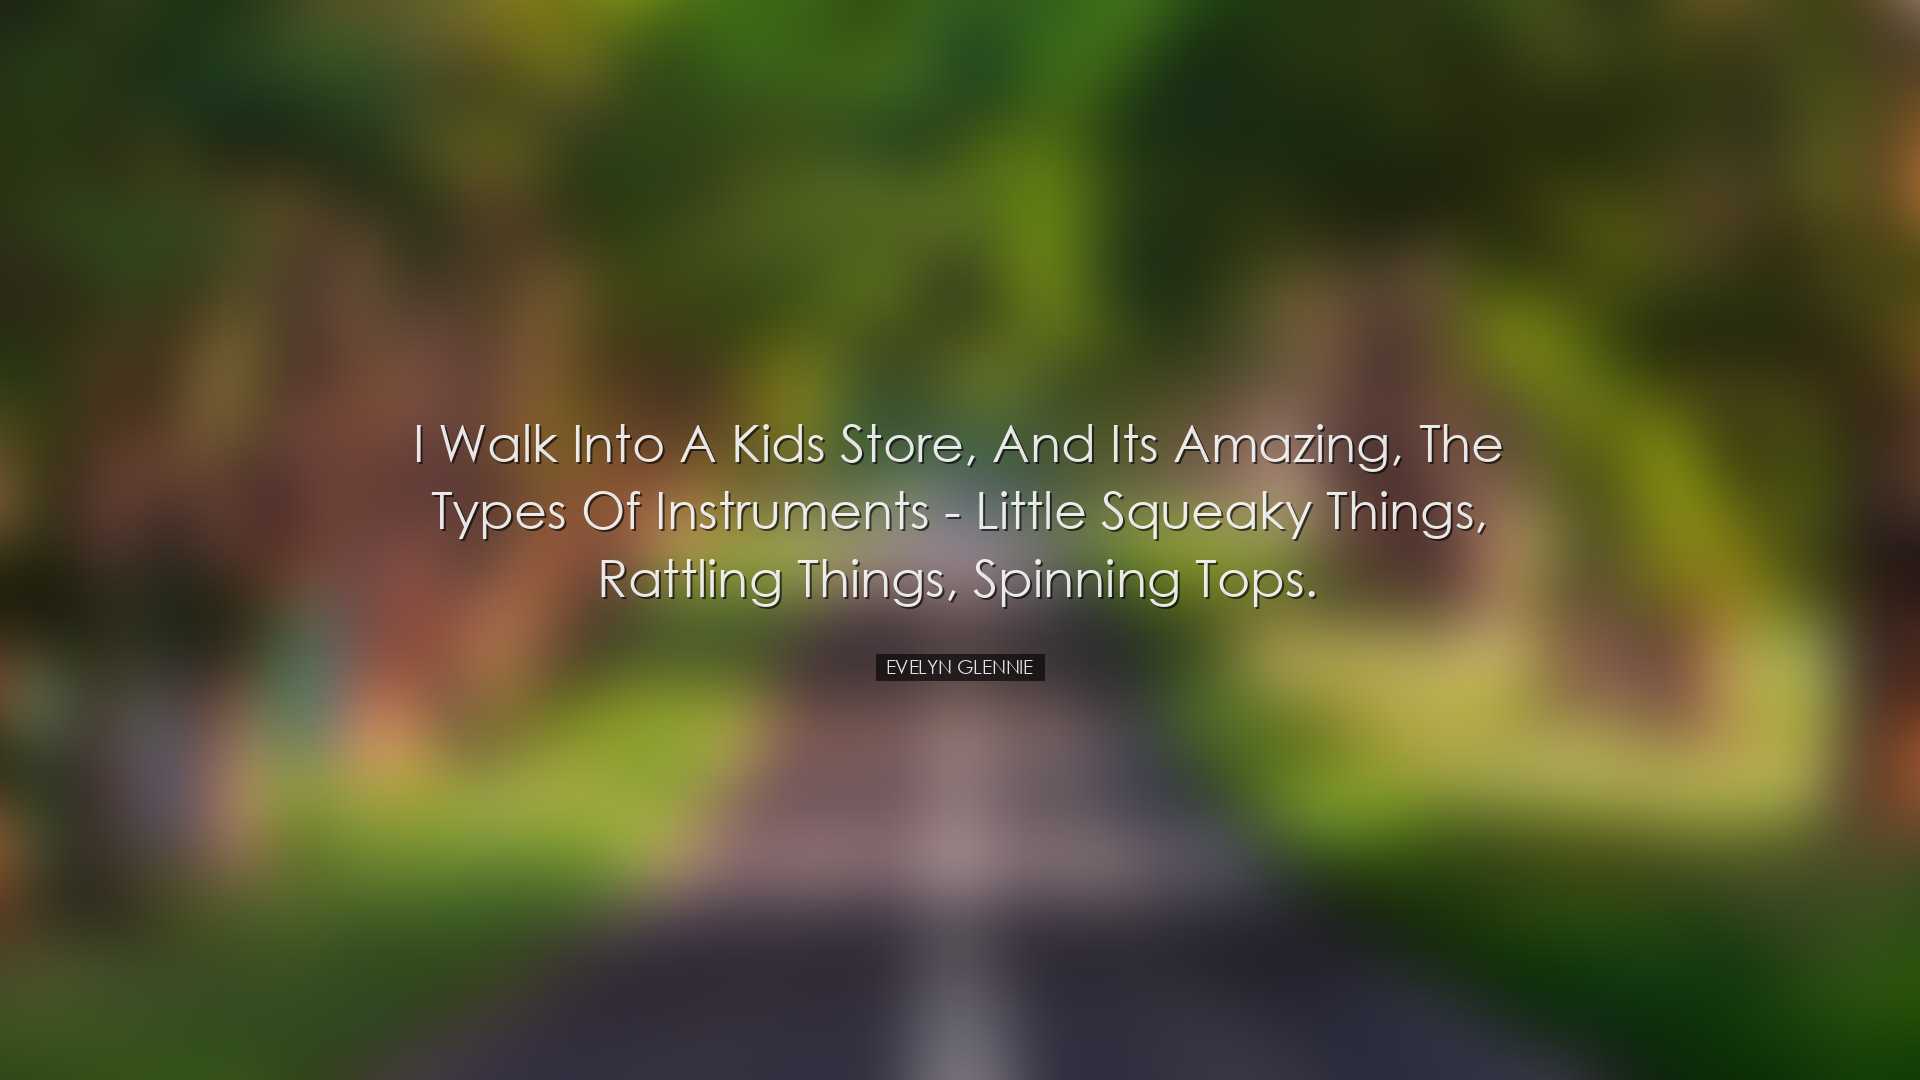 I walk into a kids store, and its amazing, the types of instrument